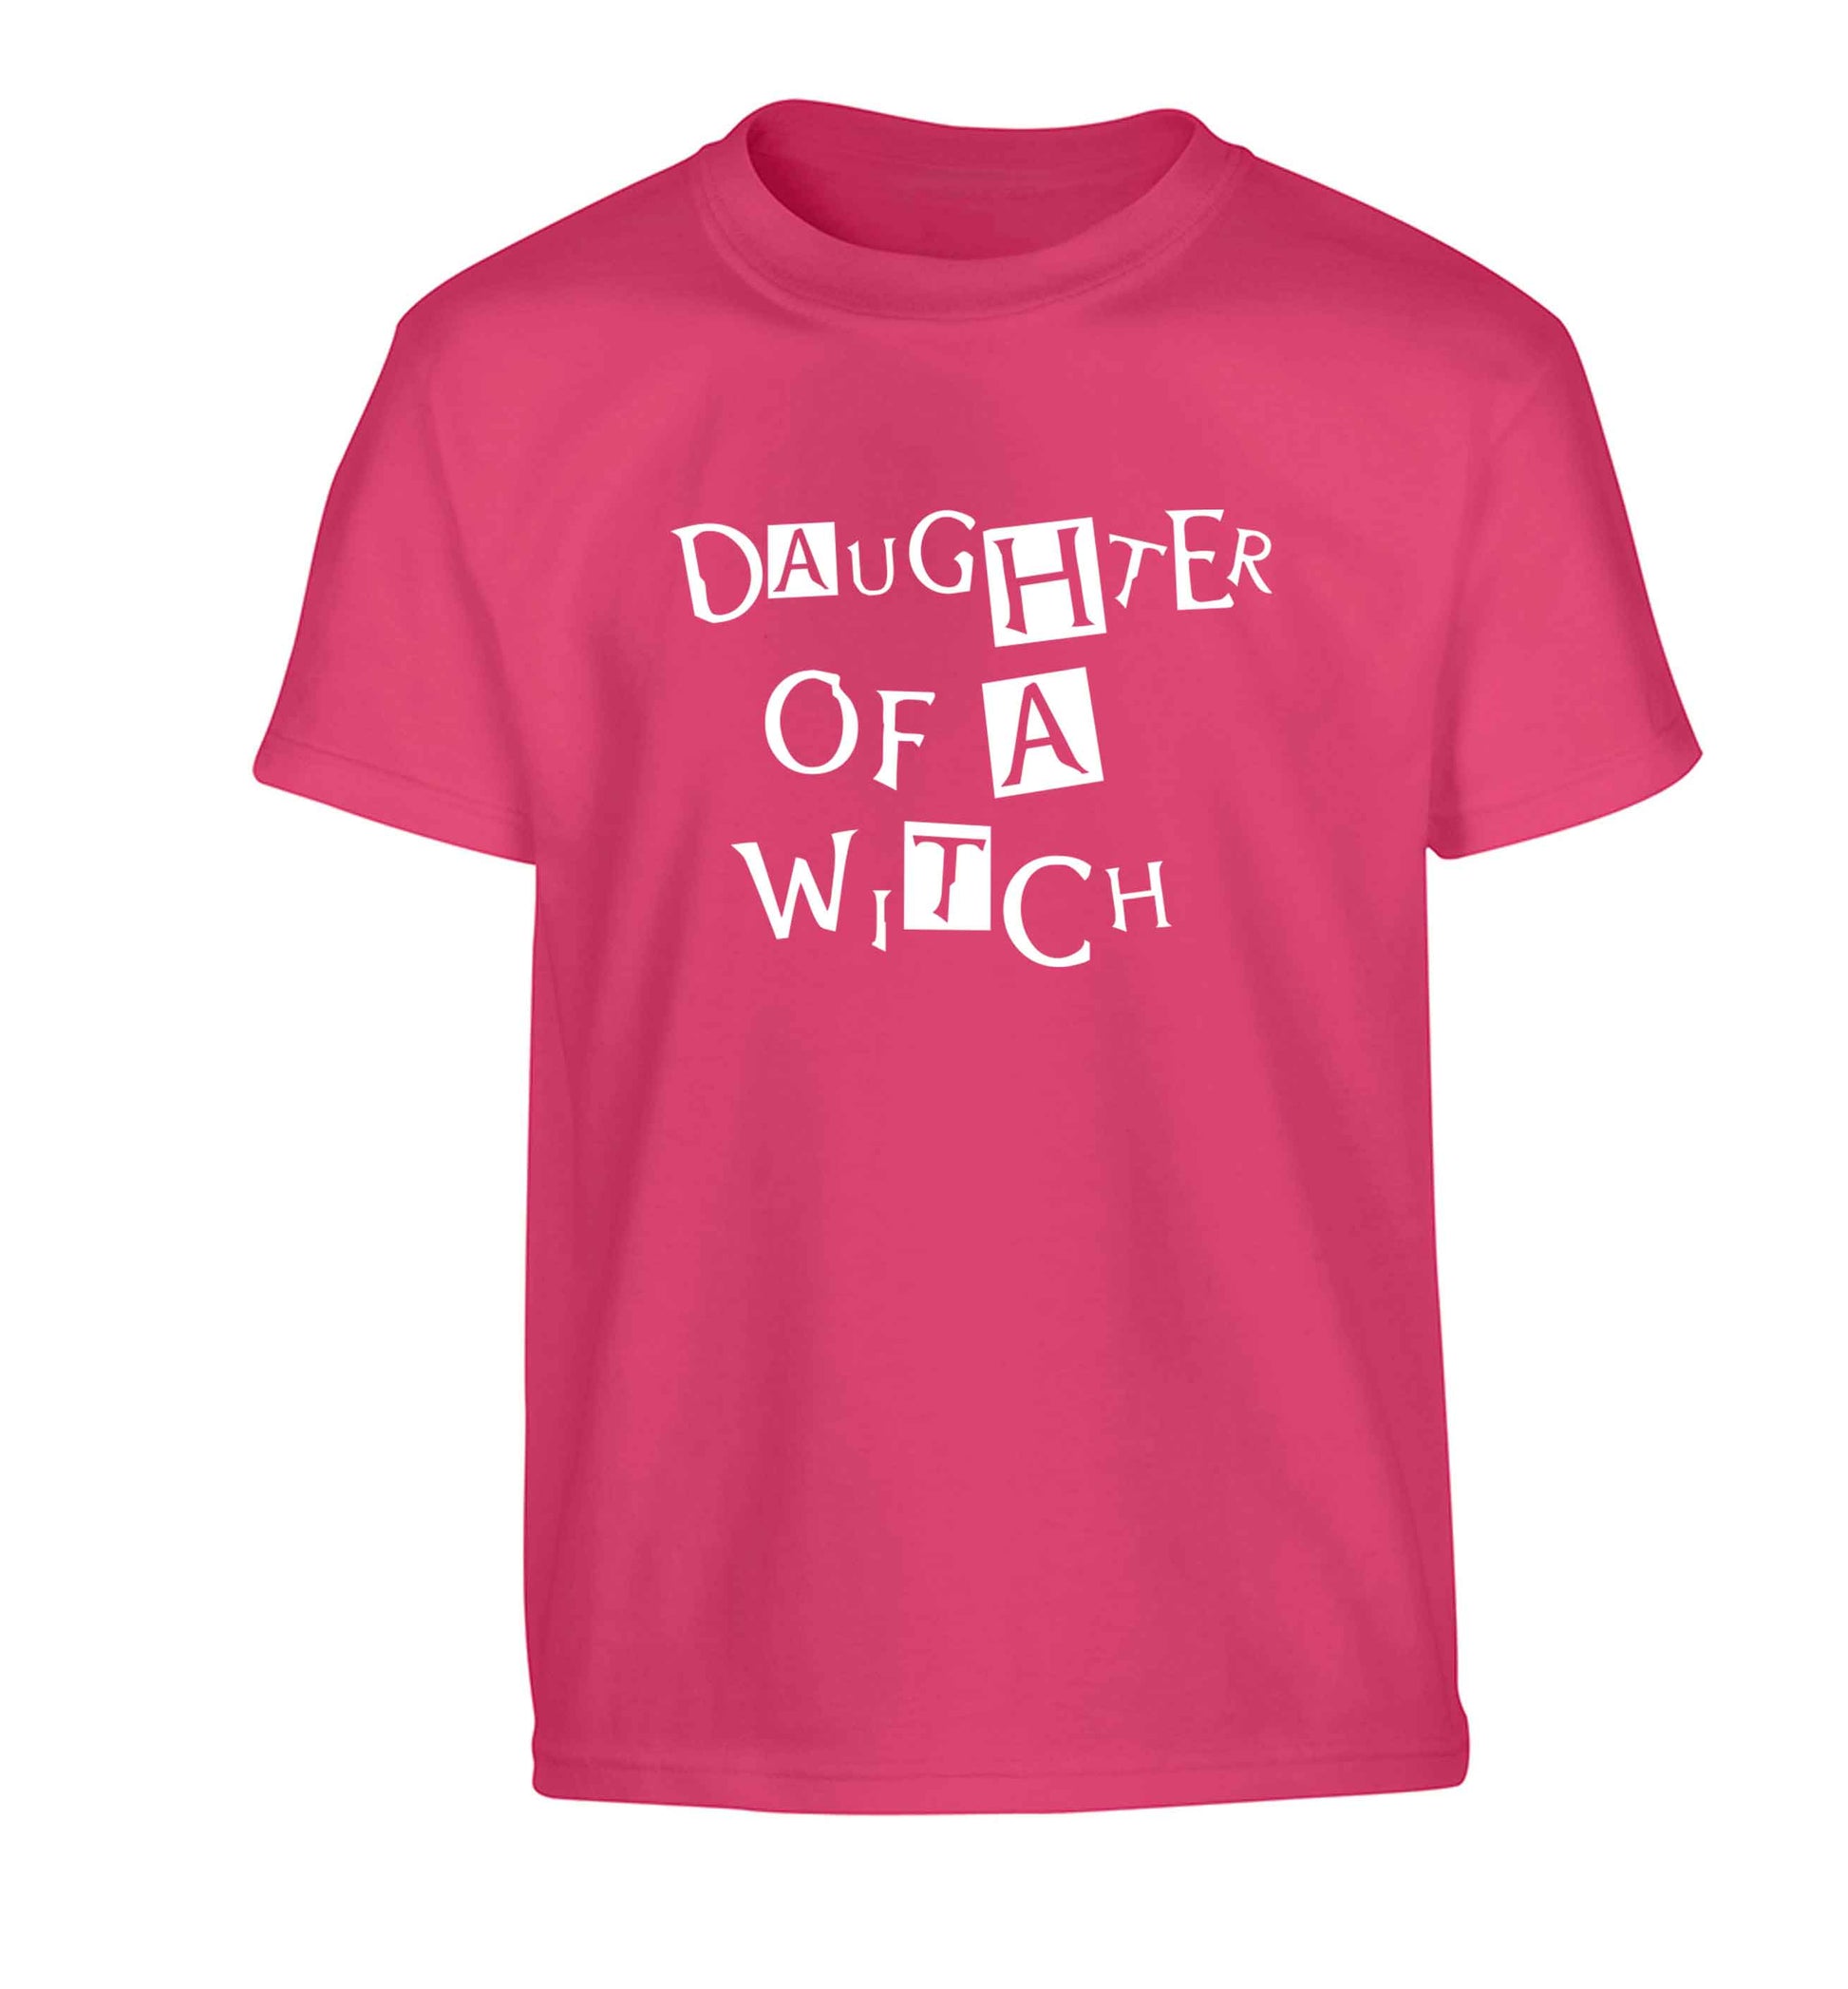 Daughter of a witch Children's pink Tshirt 12-13 Years